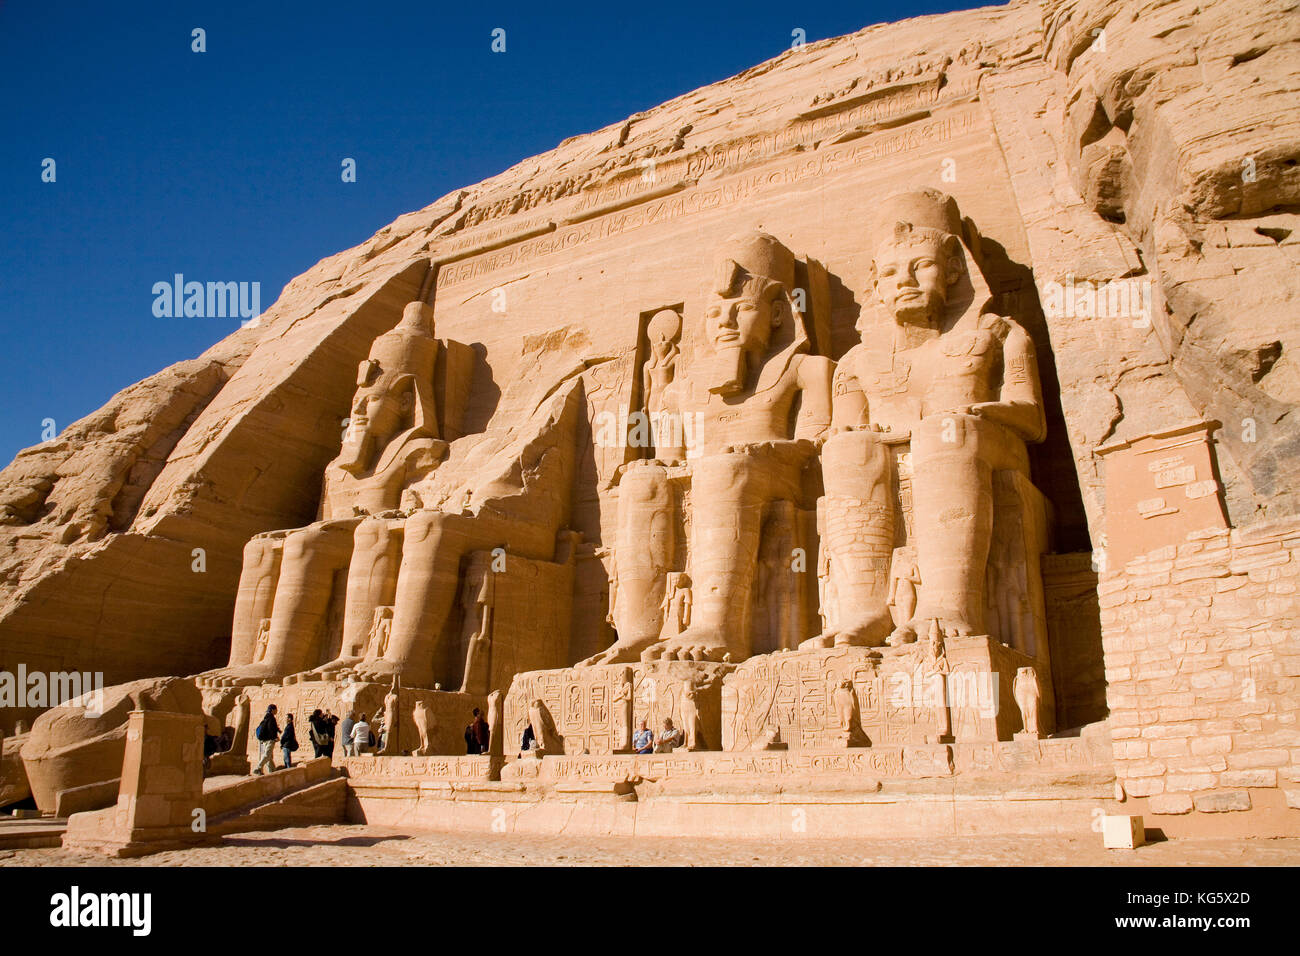 Abu Simbel archeological site in Egypt North Africa Stock Photo